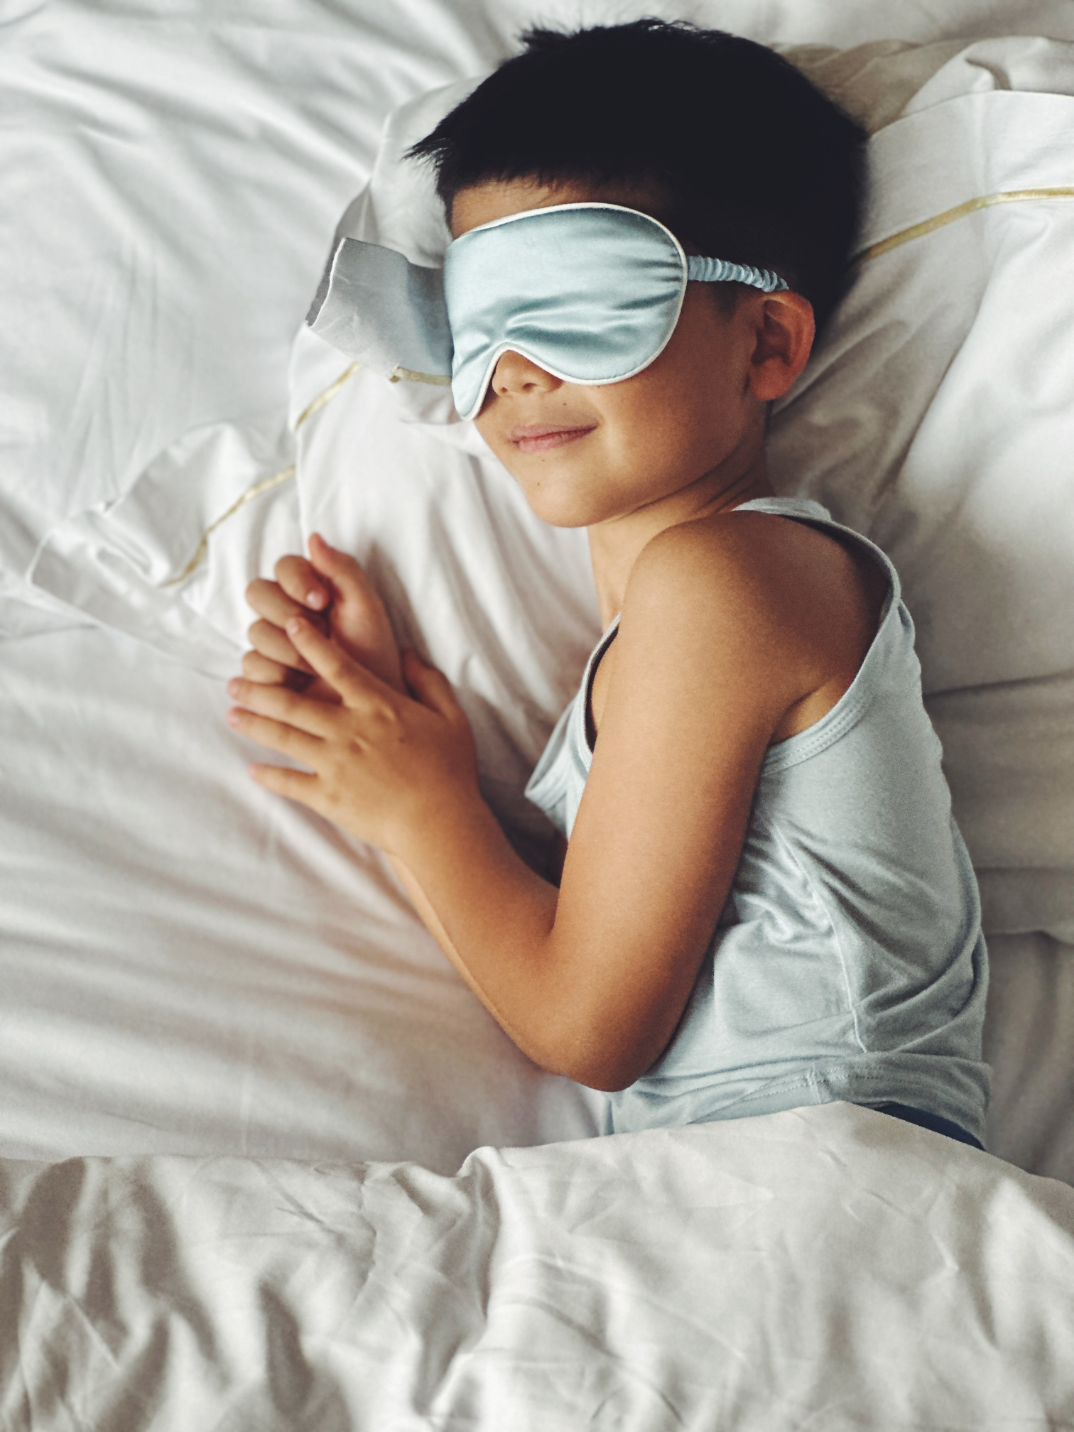 Spoil little ones with Just Peachy Limited Edition Feel Good Sweet Dreams Gift Set curated in collaboration with NakedLab. Available in a choice of Pink or Blue, each set includes Just Peachy TENCEL™ Micro Modal Top & Bottom and a luxurious sleep mask for a peaceful night’s rest. Shop now.